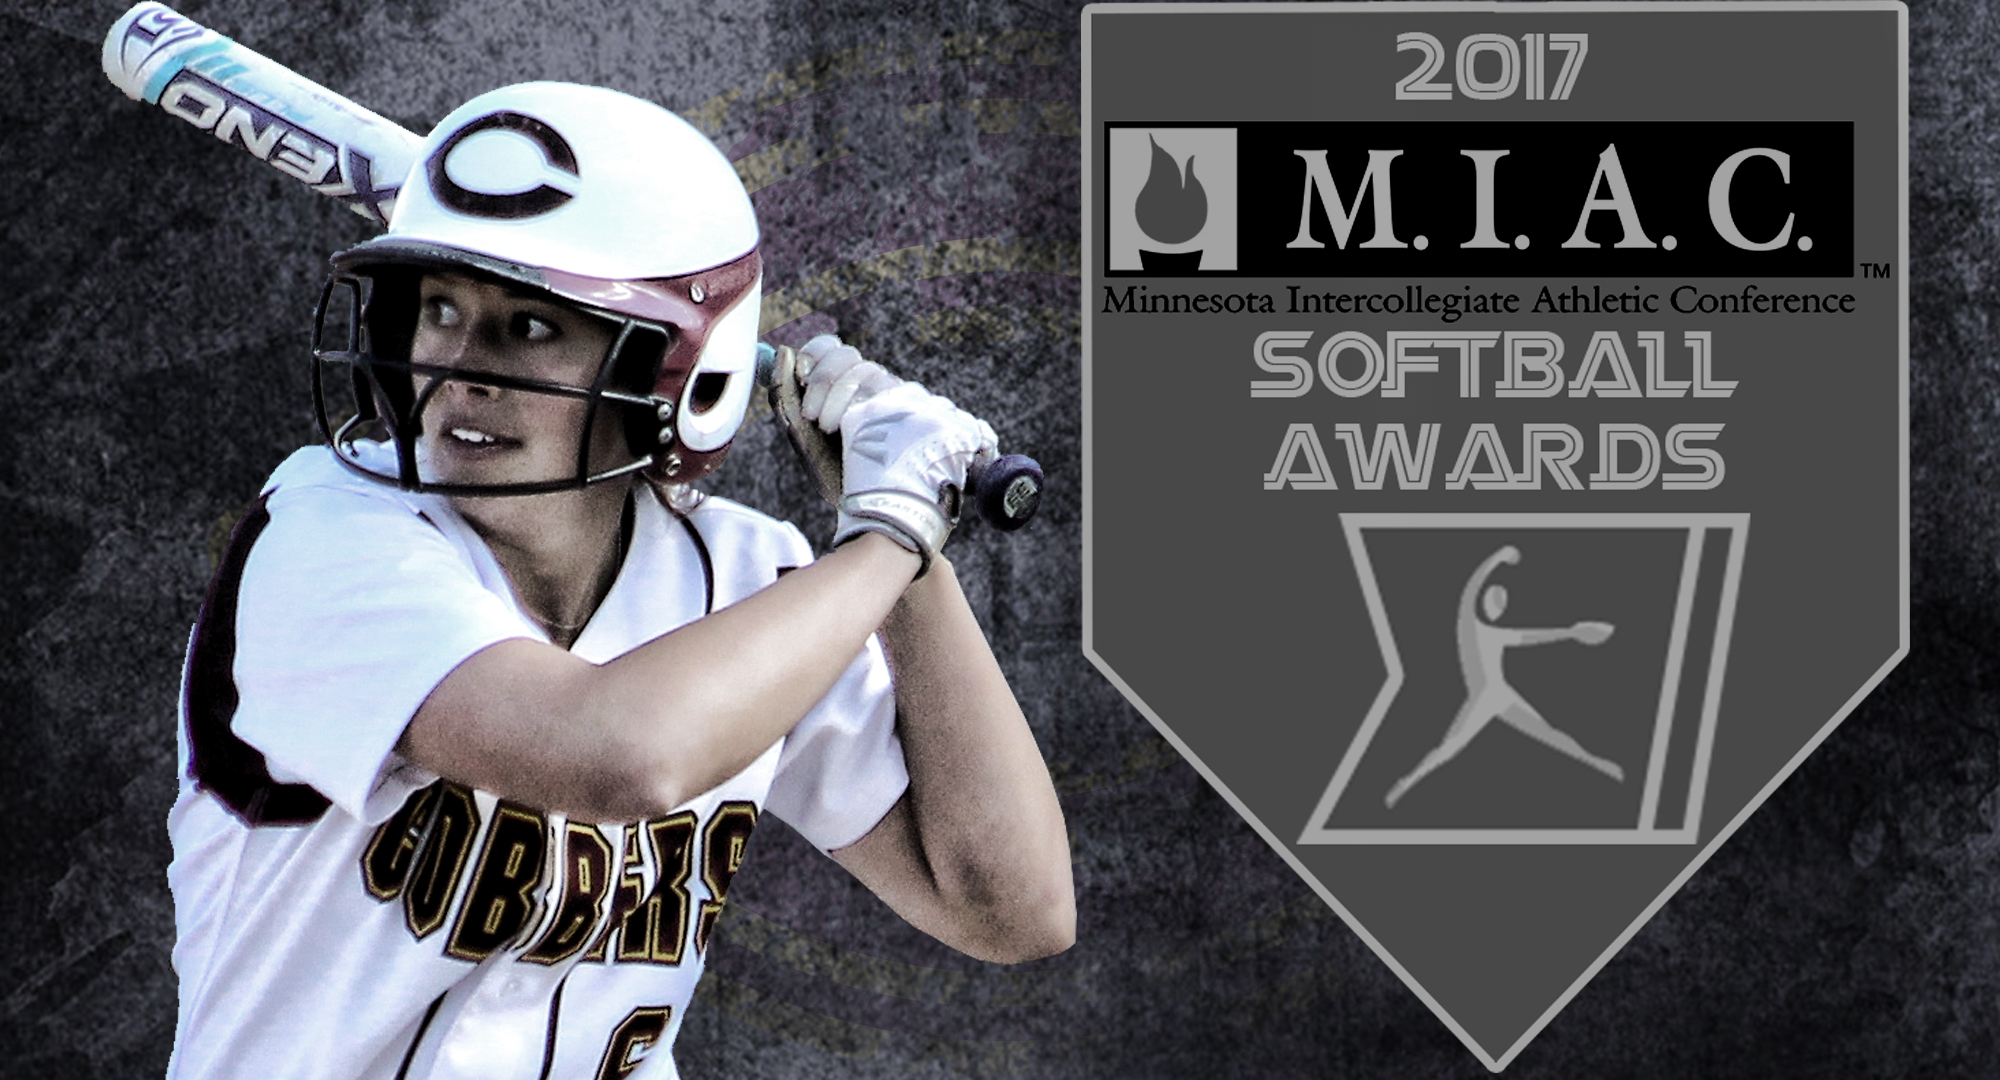 Madison Little led Concordia in at-bats, hits and stolen bases and didn't make an error in the outfield.